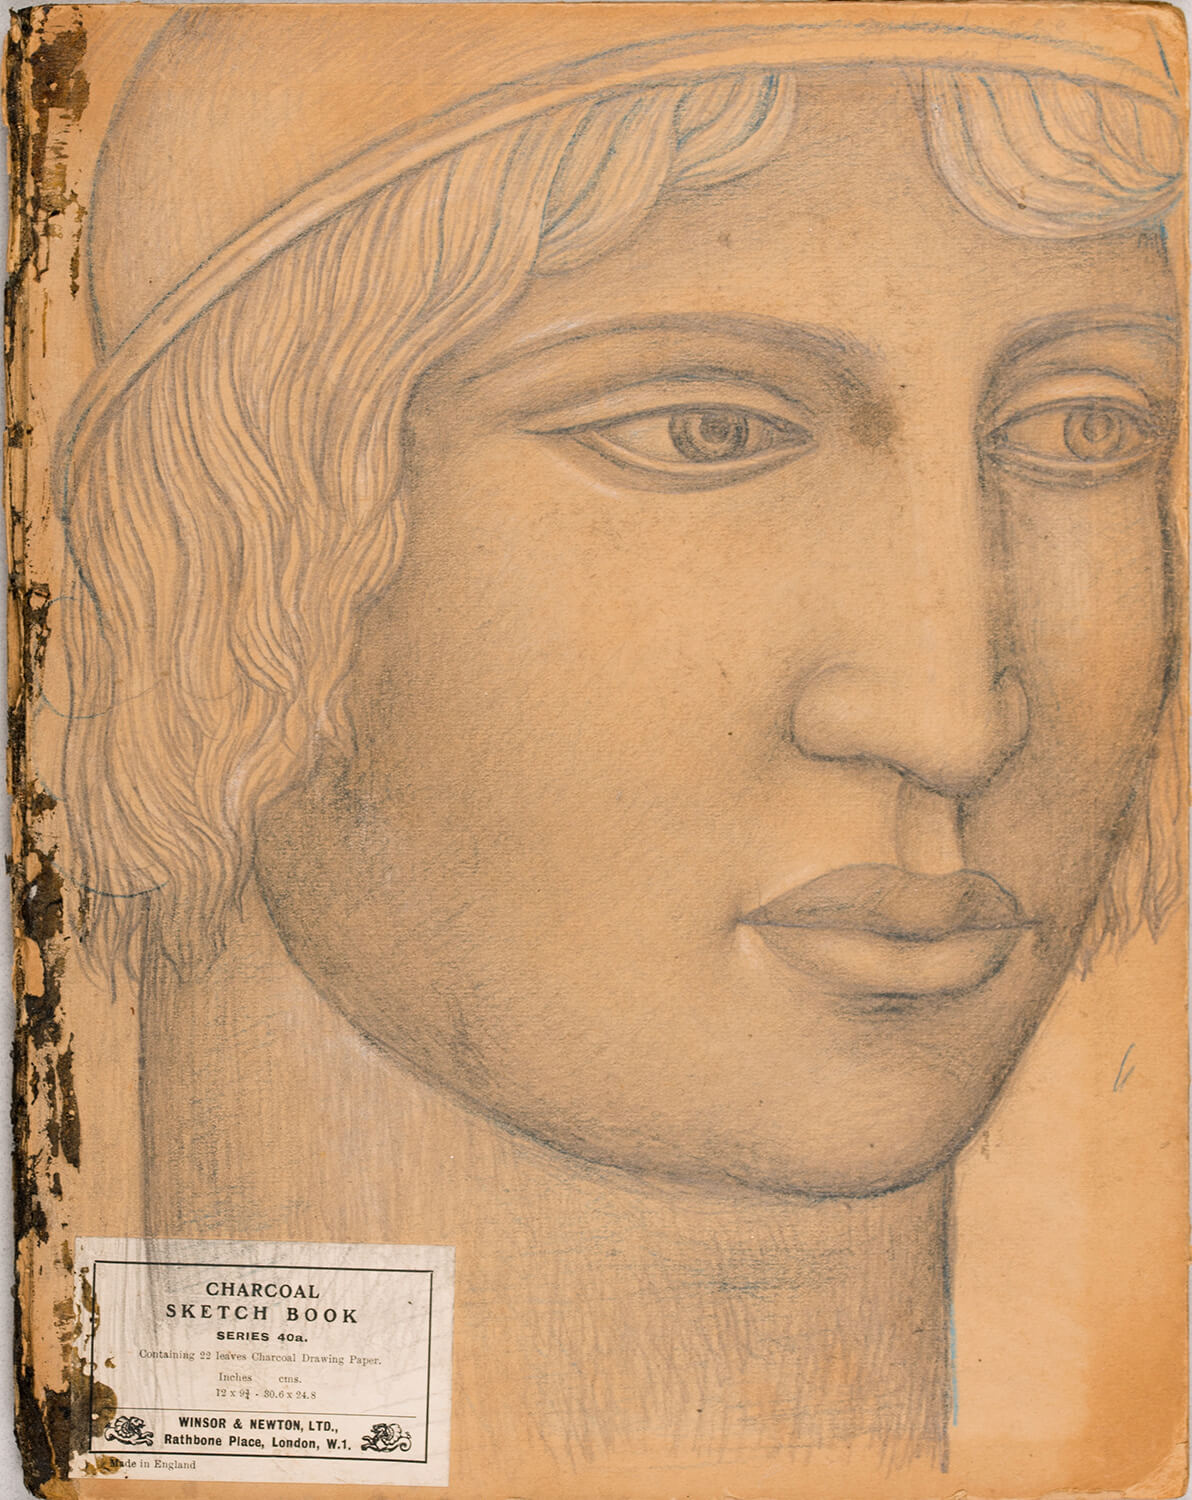 Stanley Lewis - Grecian Profile - drawn on the cover of a Charcoal Sketch Book